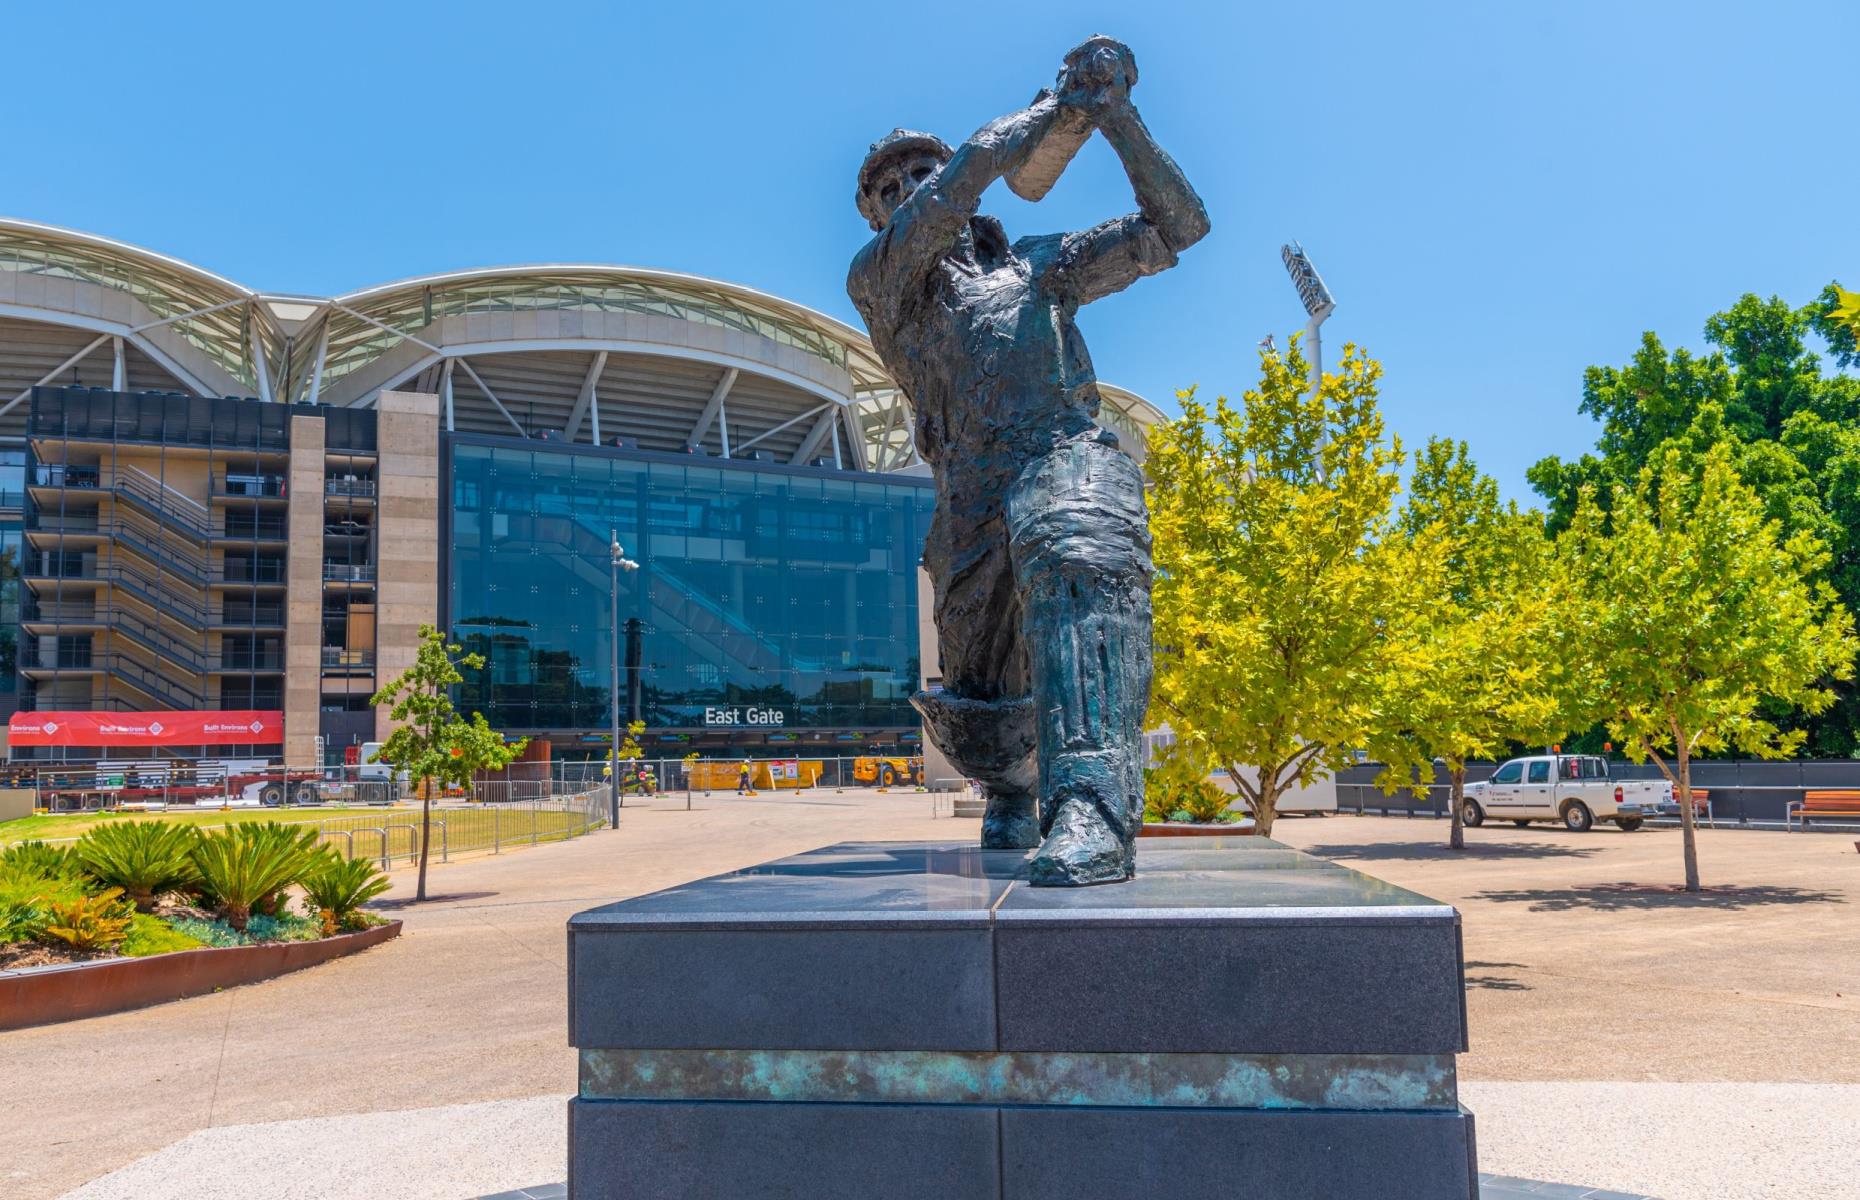 <p>For cricket fans, Adelaide Oval is hallowed ground. If you can’t bag a ticket to a match you can visit the <a href="https://www.adelaideoval.com.au/bradman-collection/">Bradman Collection</a>, a museum located in the Riverbank Stand that's dedicated to the Australian sporting legend. As well as footage of the batsman and interactive displays, it includes some of Sir Donald Bradman’s personal cricket memorabilia. It’s on loan from the State Library of South Australia and is free to visit.</p>